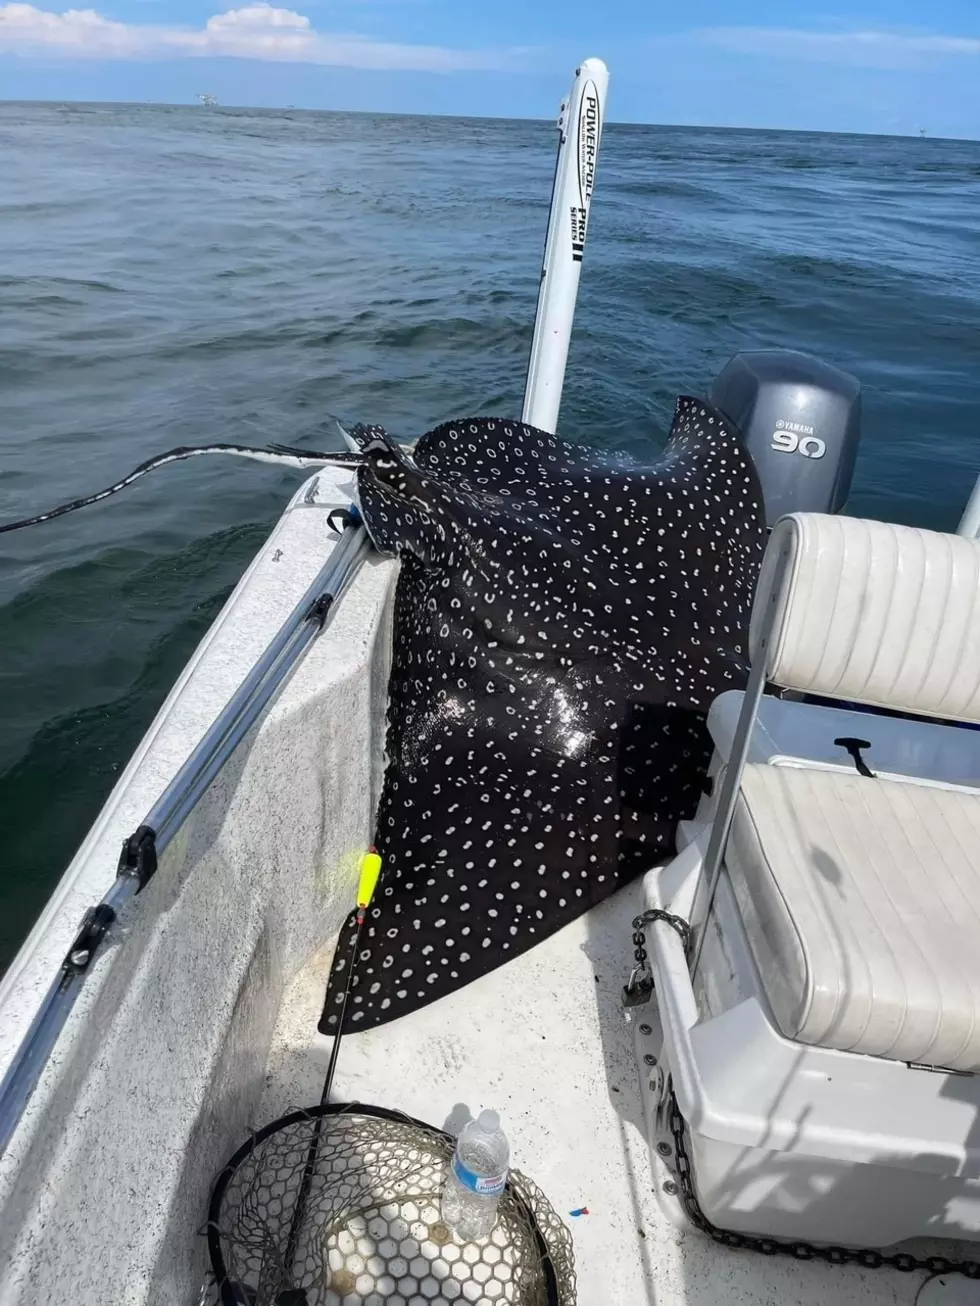 400 Pound Sting Ray Jumps in Alabama Woman’s Boat, Sends Her to ER